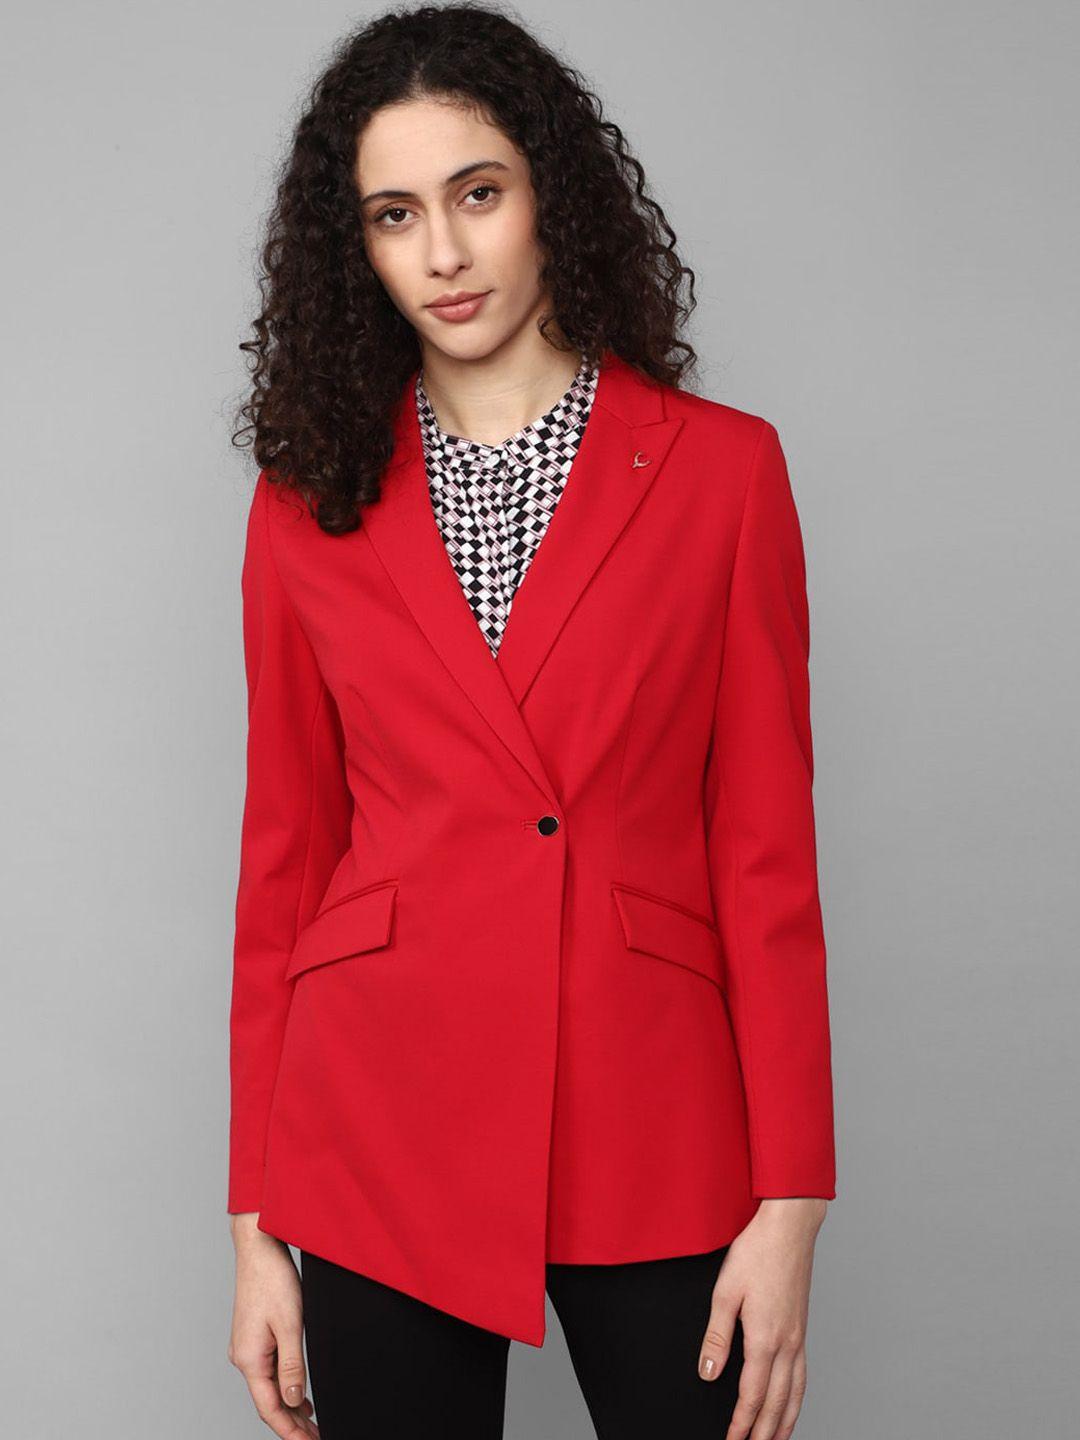 allen-solly-woman-single-breasted-casual-blazers